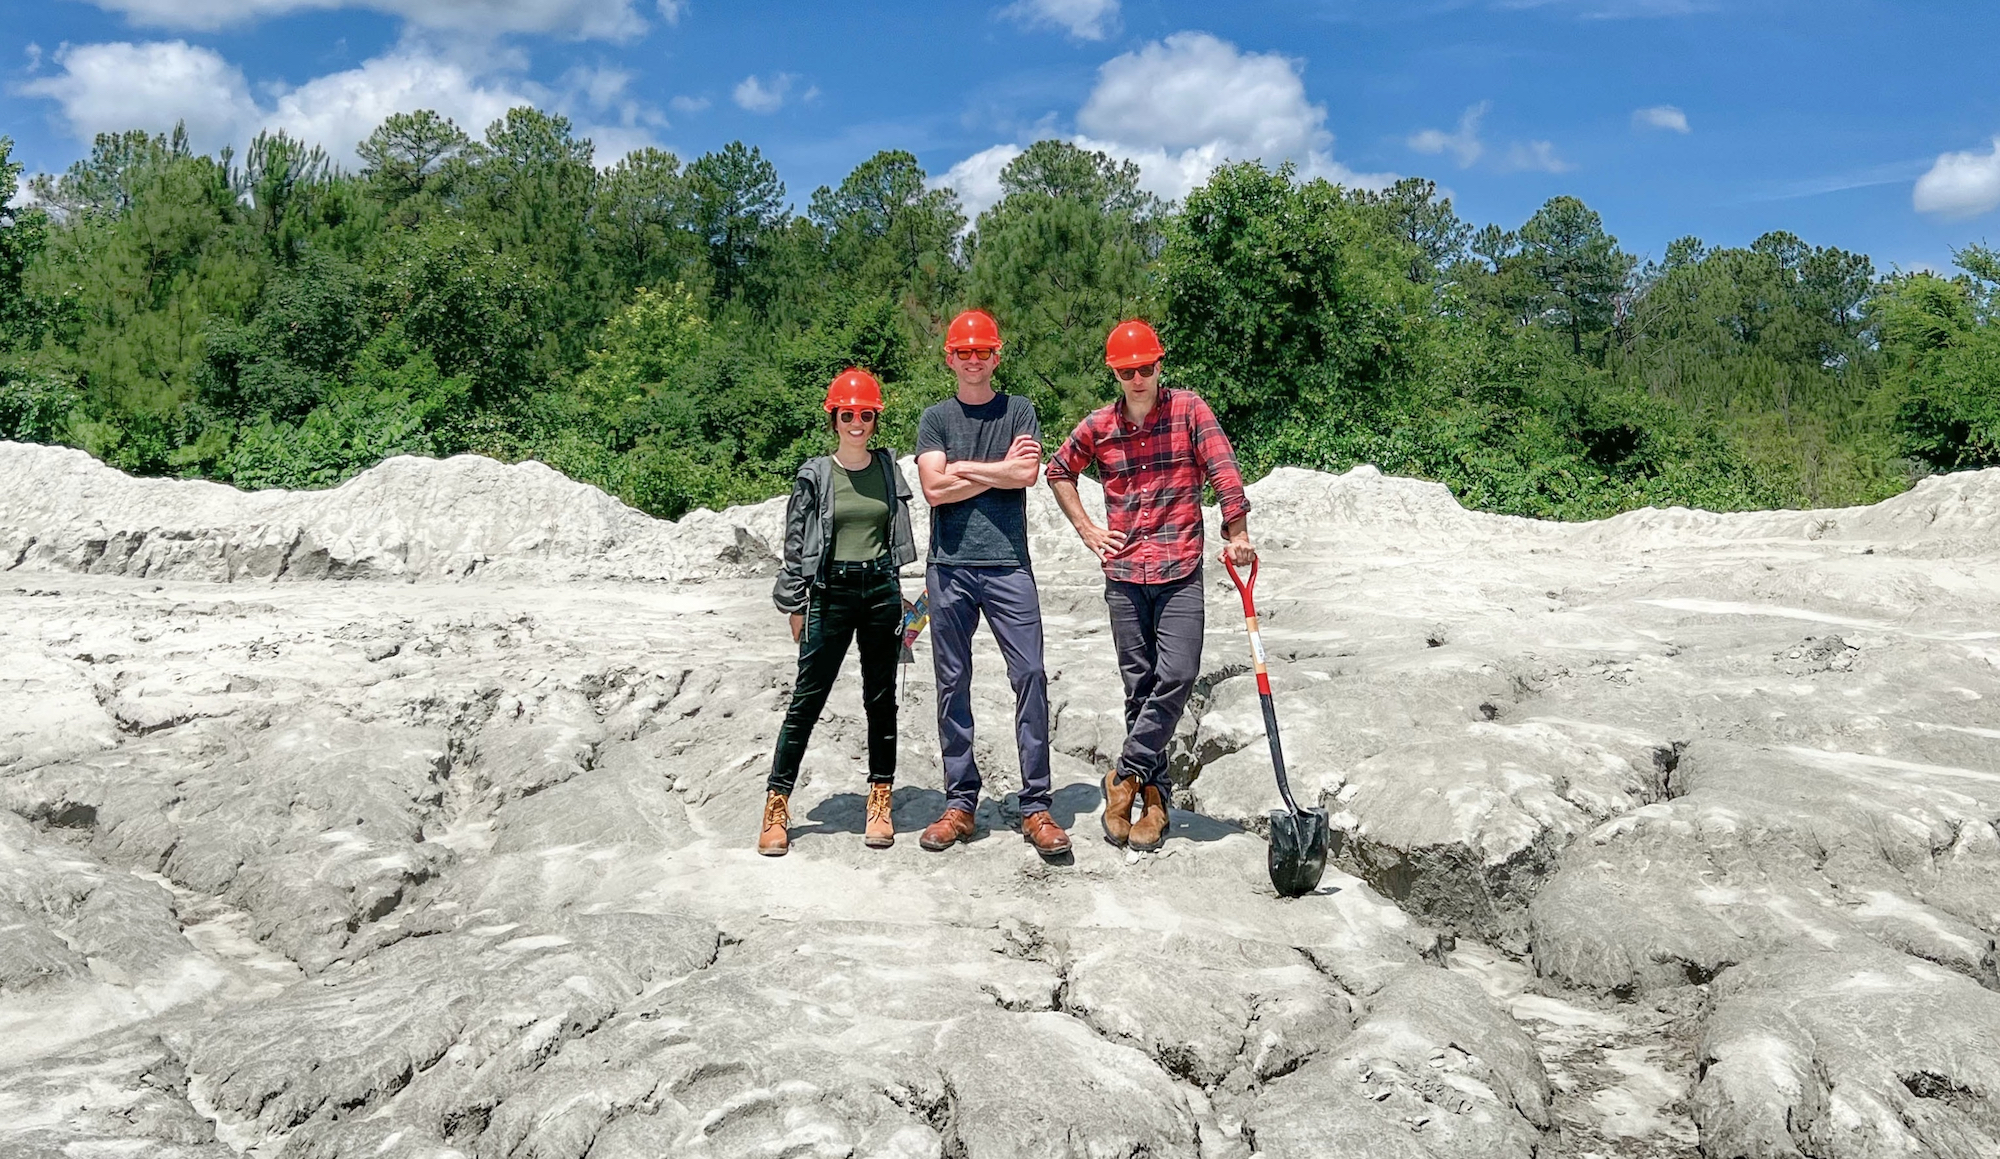 The Lithos founding team standing atop a rocky deposit